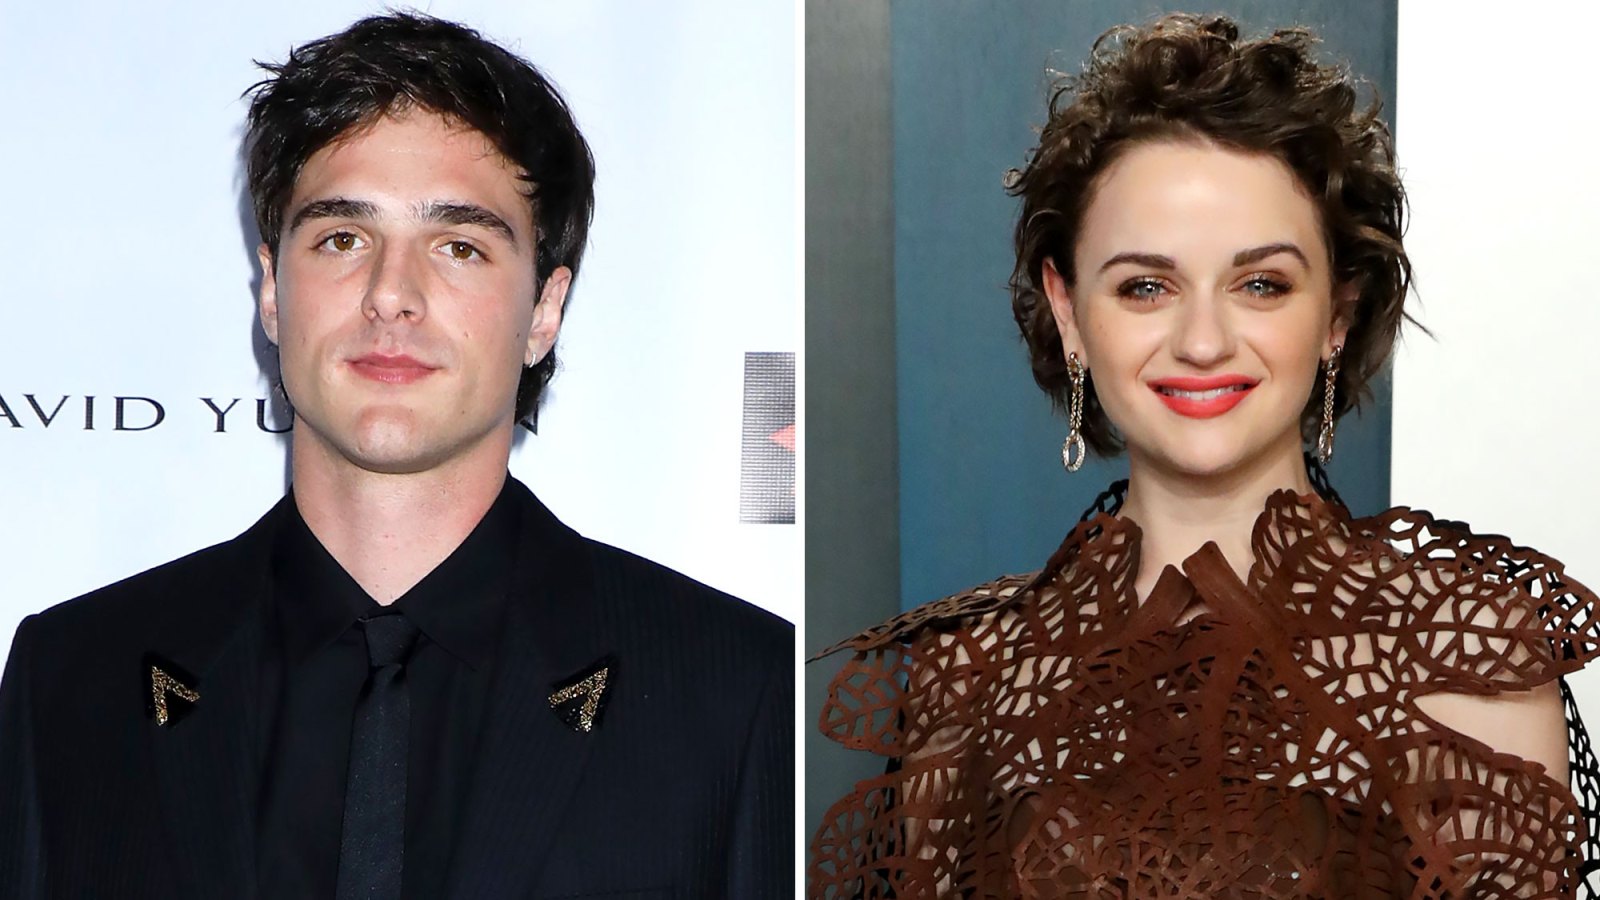 Jacob elordi shares kissing booth memory with ex joey king